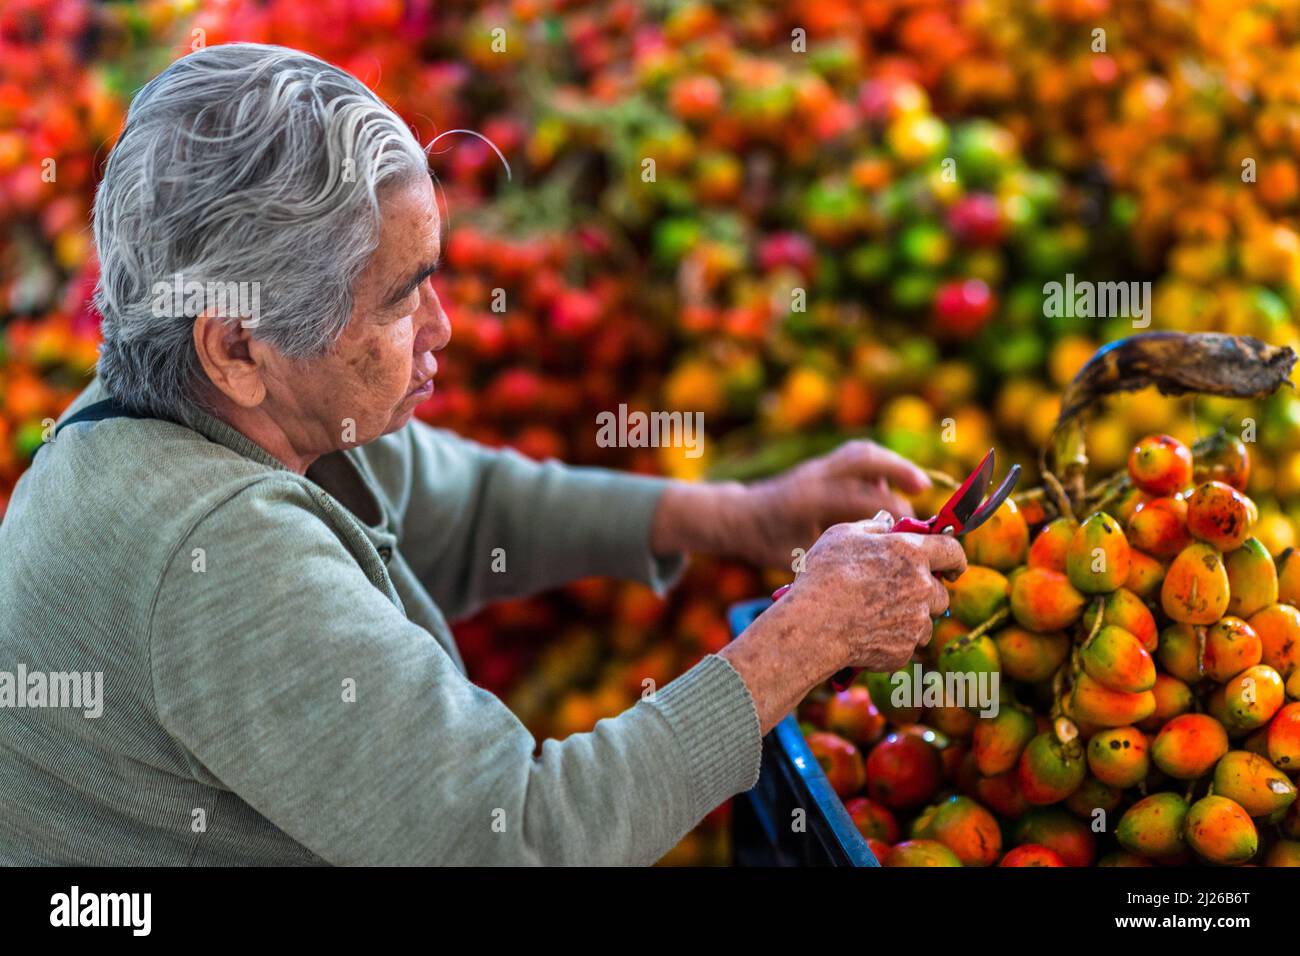 A Colombian woman cuts raw chontaduro (peach palm) fruits from the bunch in a processing facility in Cali, Valle del Cauca, Colombia. Stock Photo